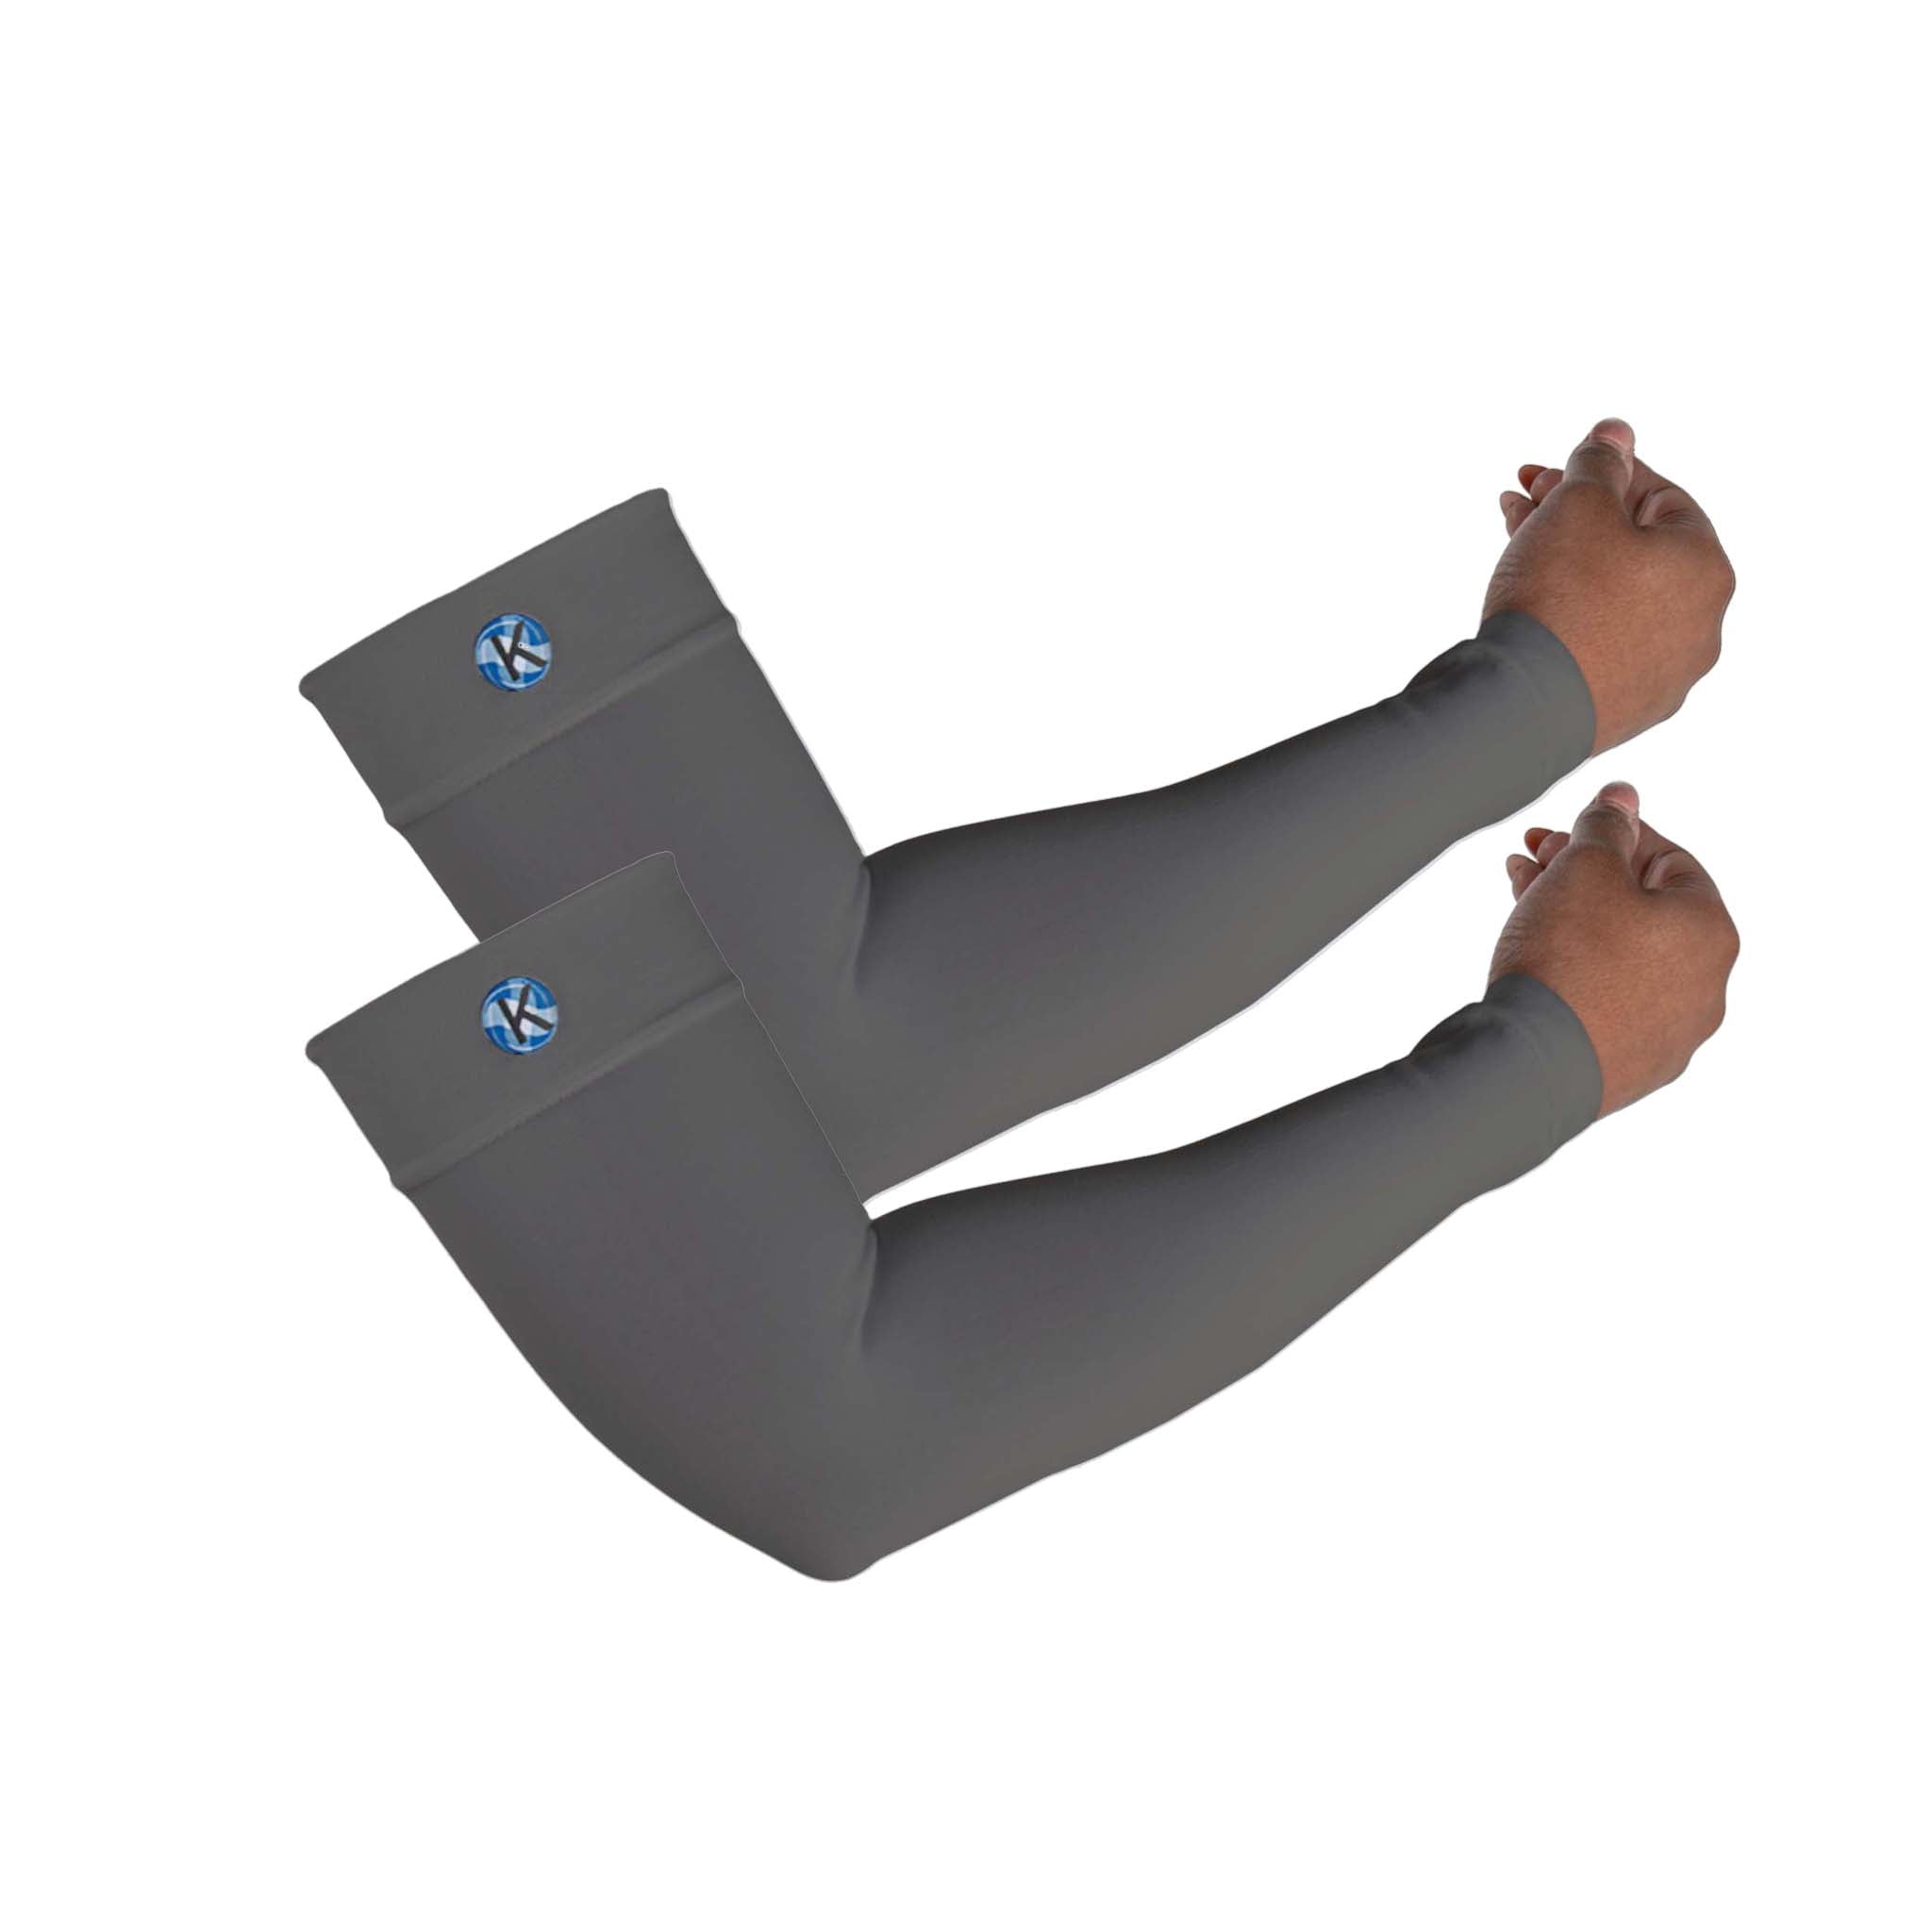 XL) Lymphedema Sleeve Compression Arm Sleeve Prevent Swelling For Outdoors